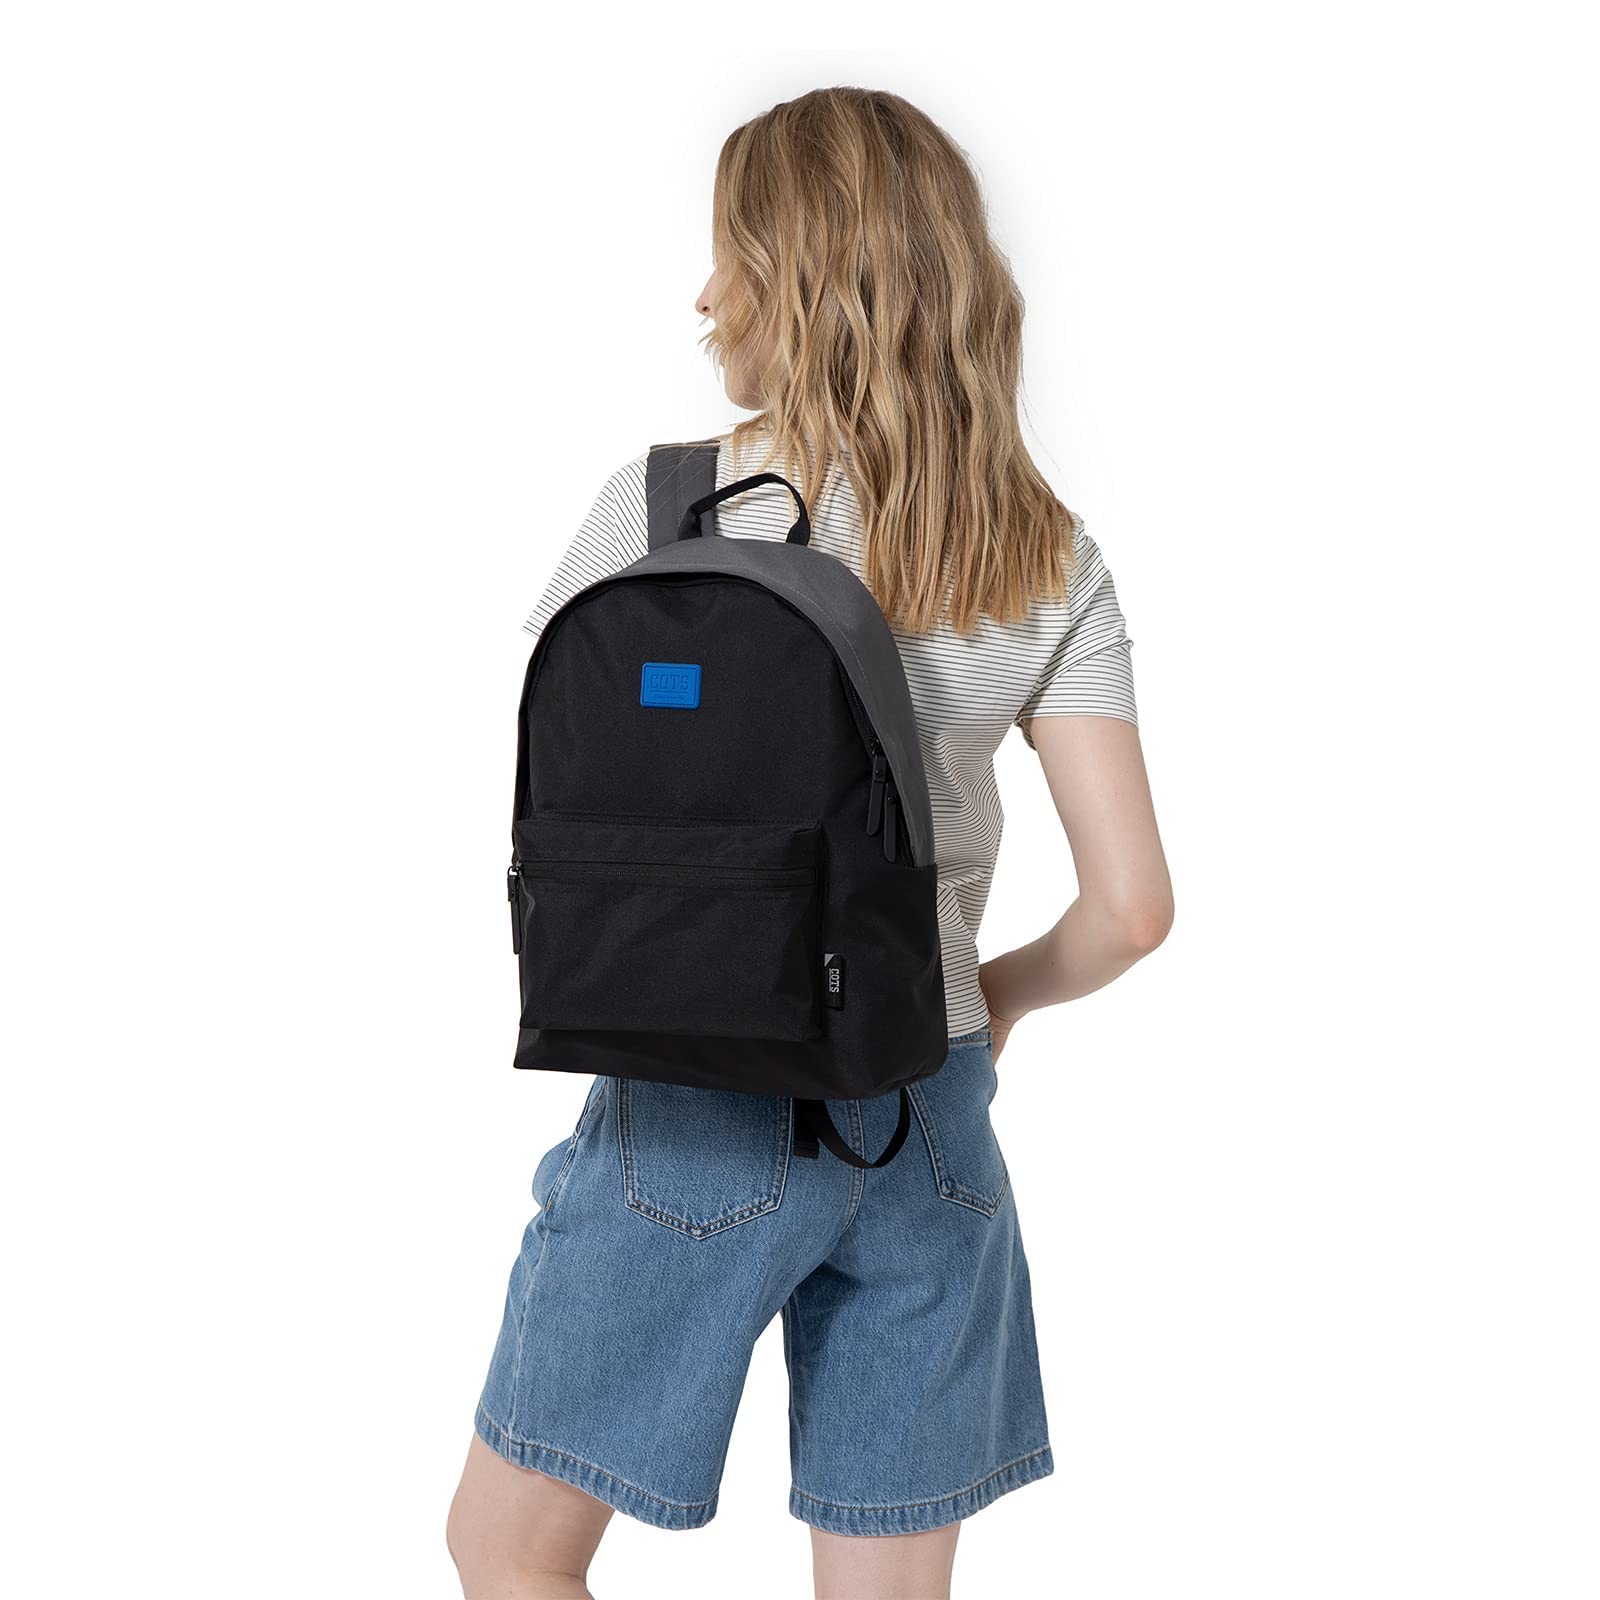 COTS Elementary School Backpack for Boys Girls Teen, Lightweight Casual Backpack, Preschool Bookbag Classical Basic Daypack for Middle High School Work Travel Shopping